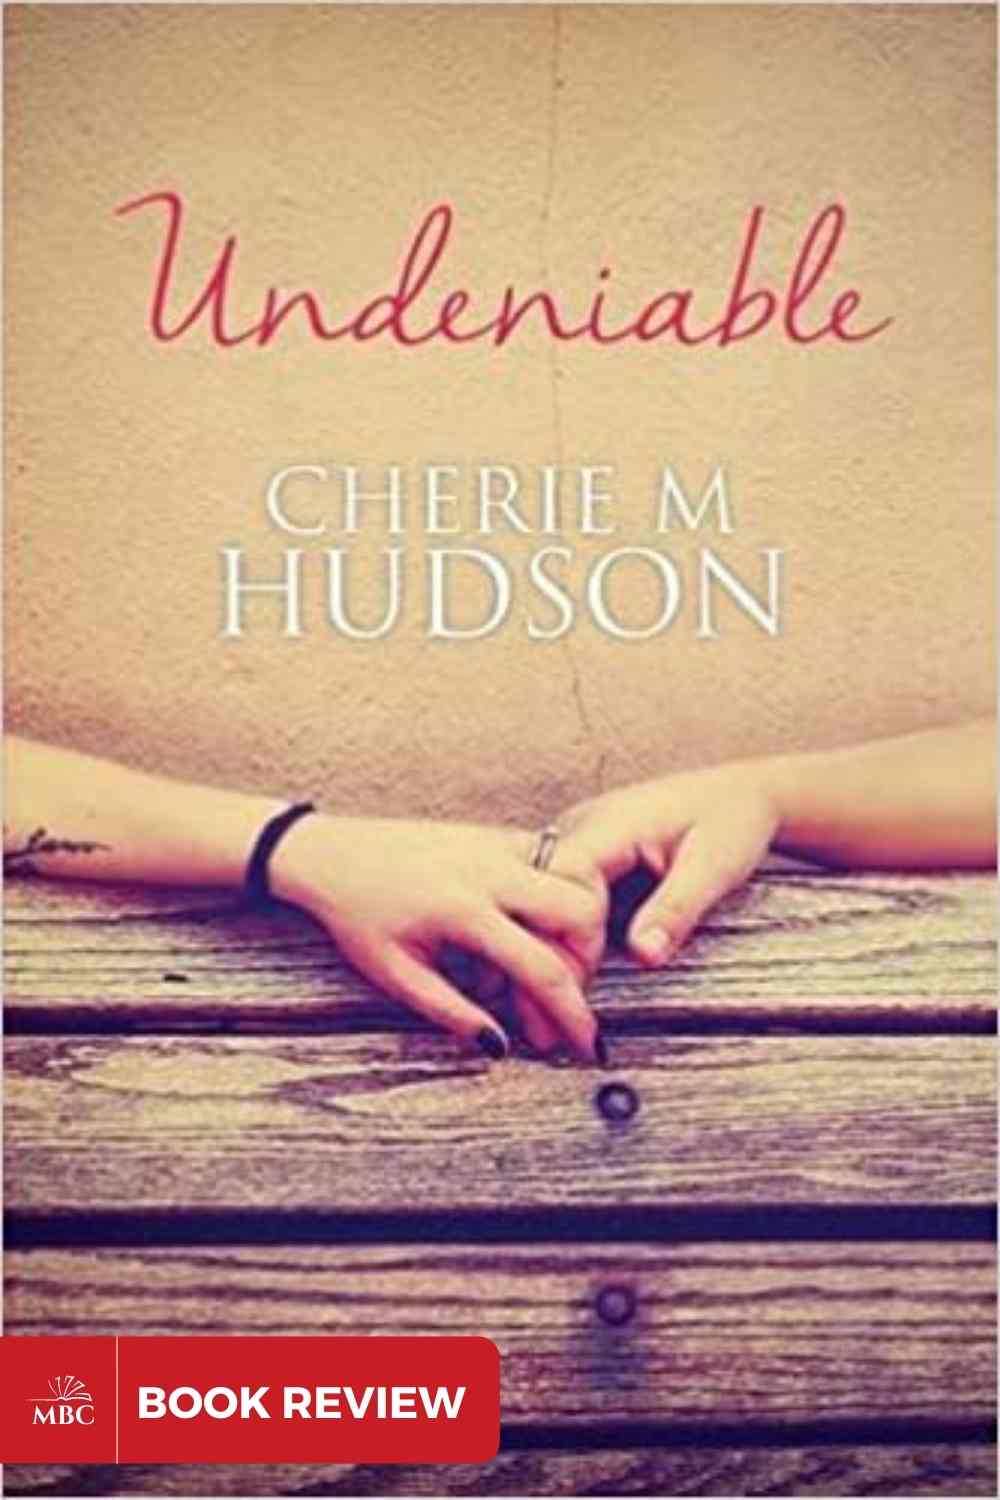 BOOK REVIEW: Undeniable by Cherie M. Hudson